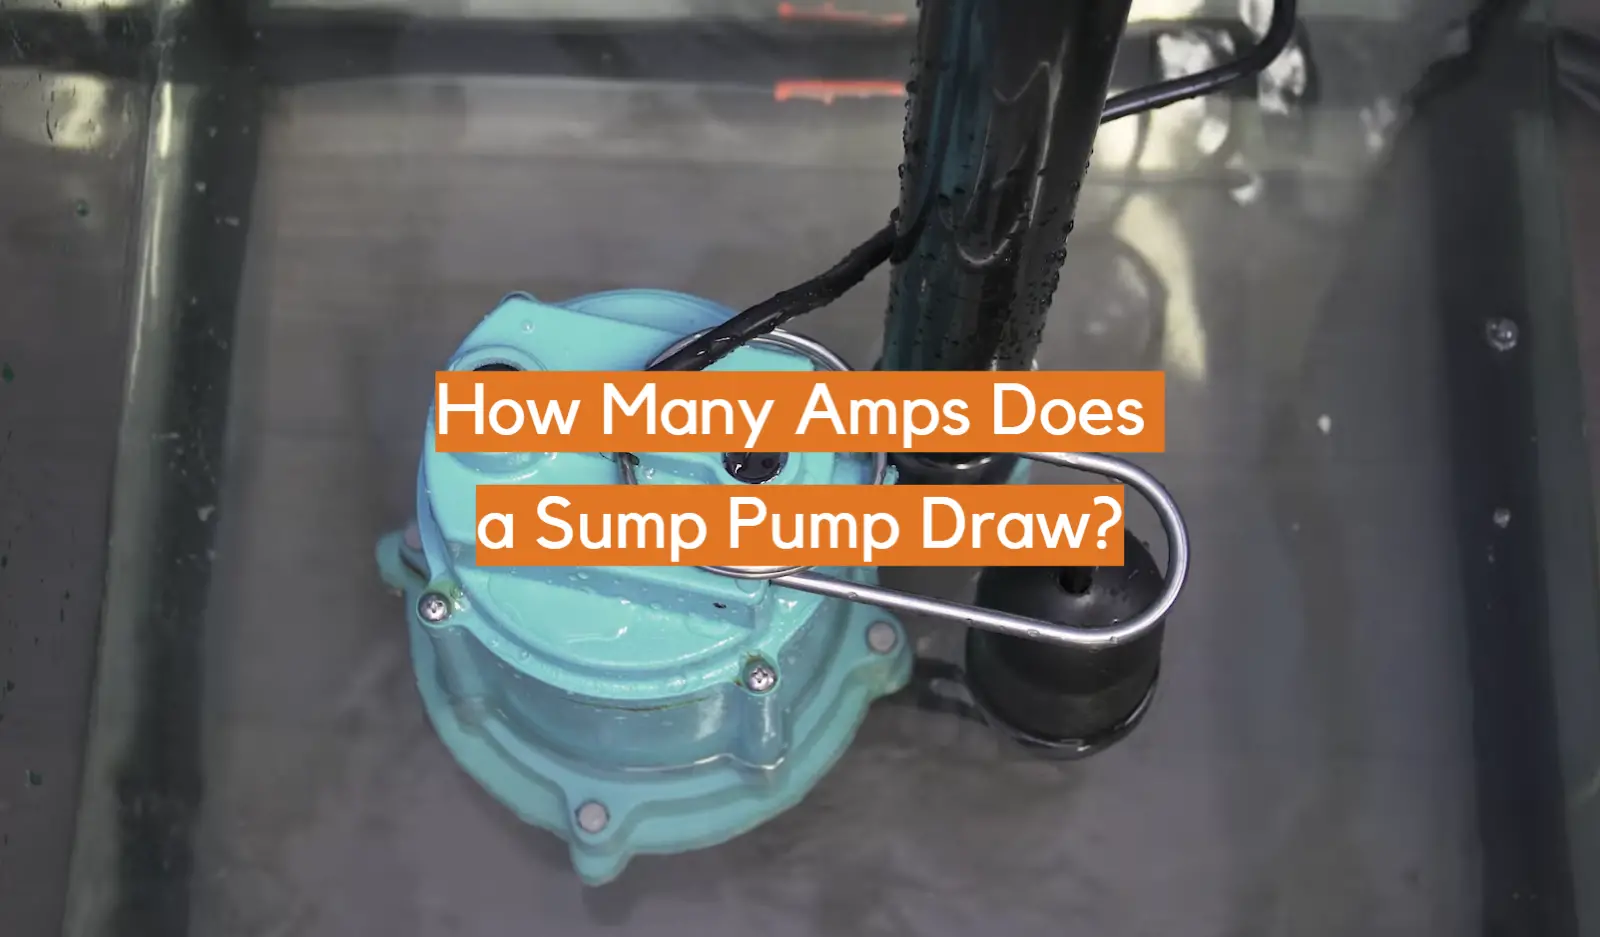 How Many Amps Does a Sump Pump Draw?